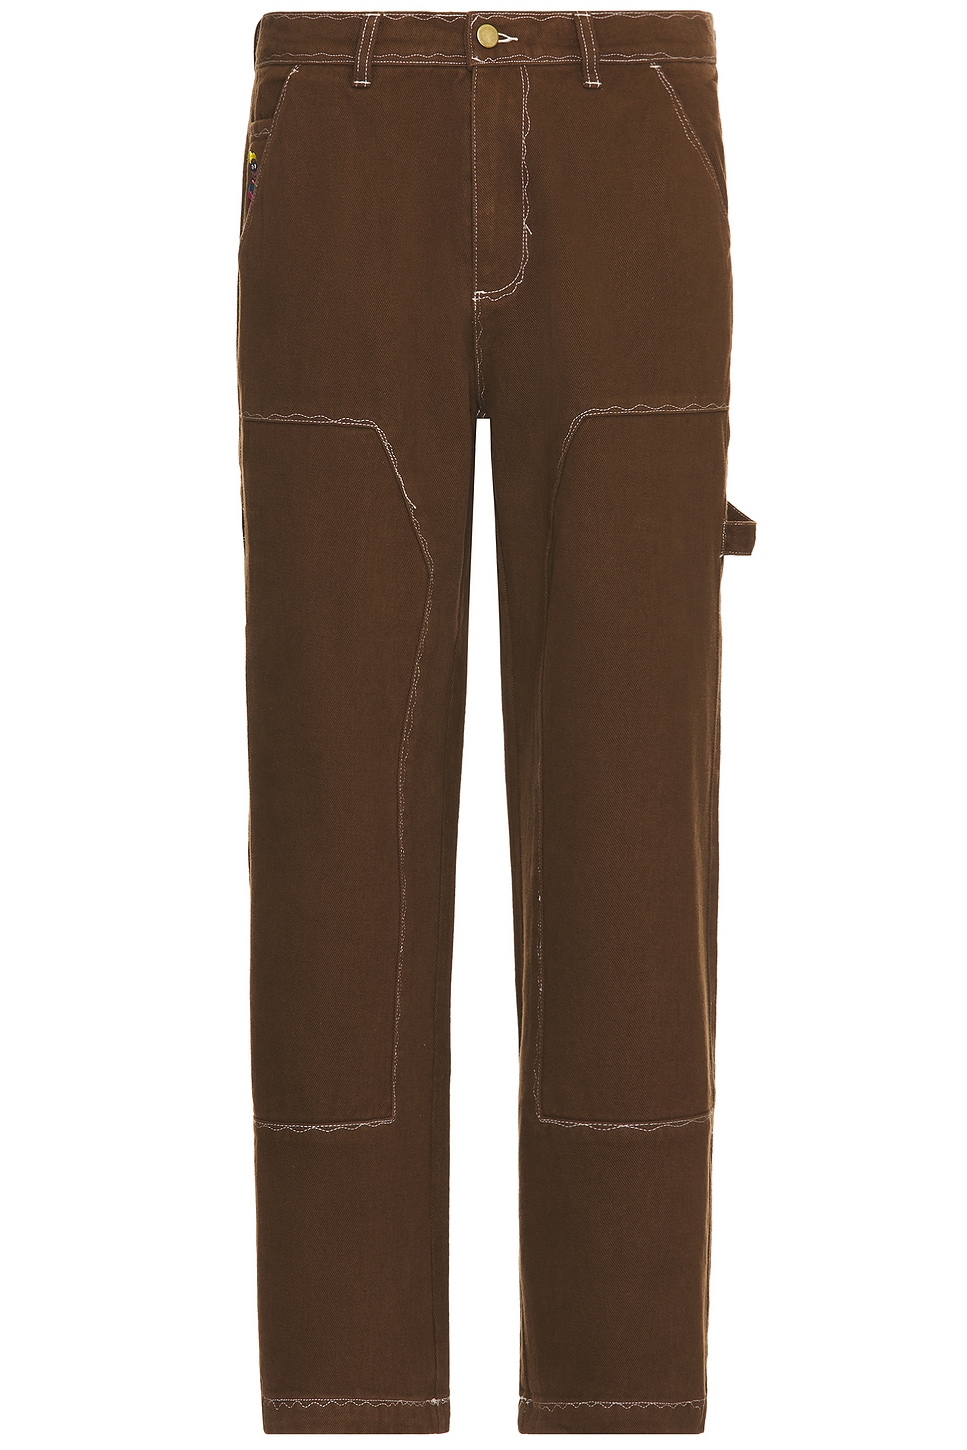 Image 1 of KidSuper Messy Stitched Work Pant in Brown